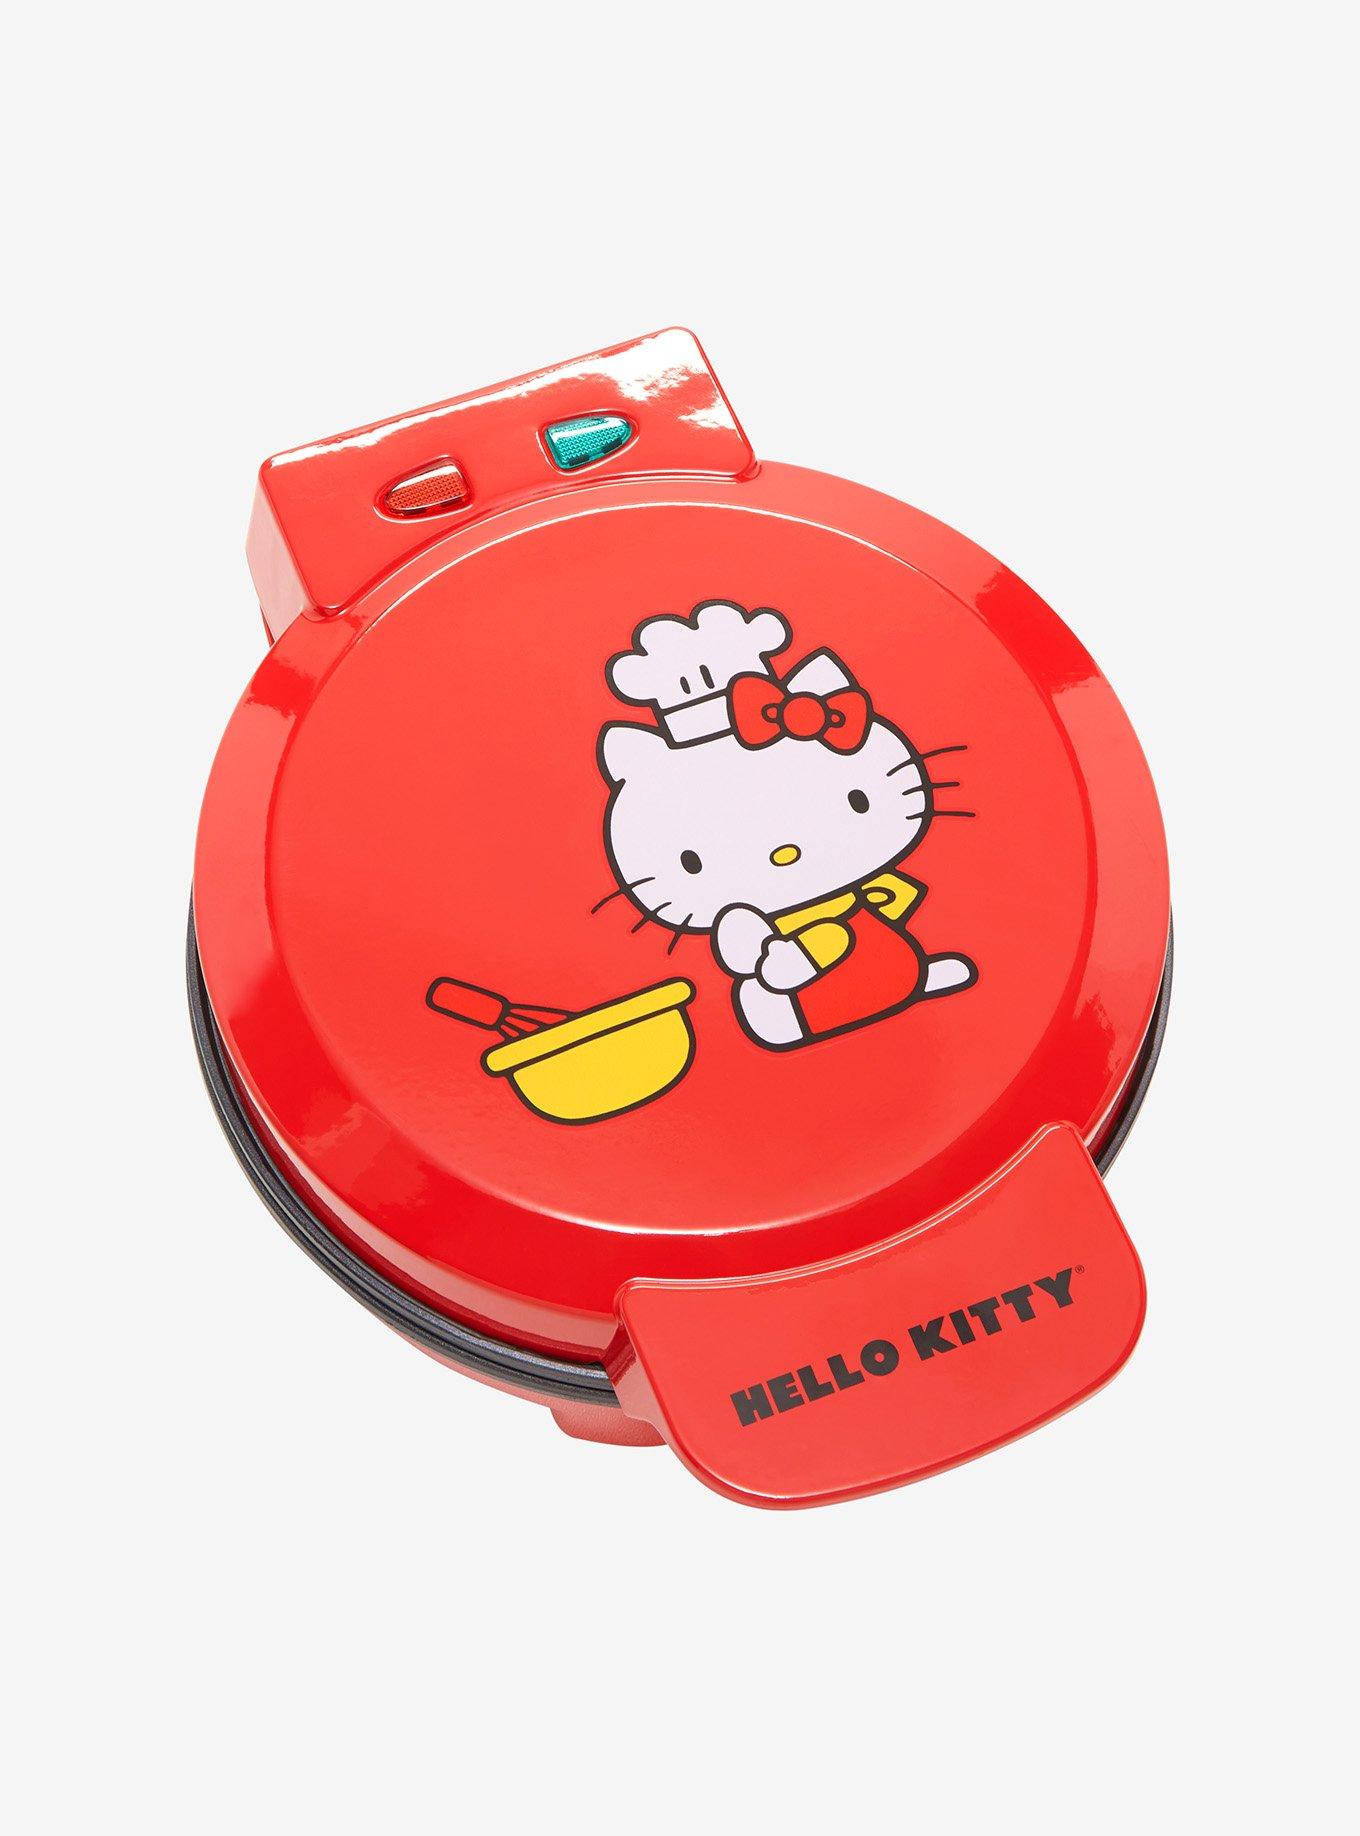 CARE BEARS ROUND WAFFLE MAKER - The Pop Insider